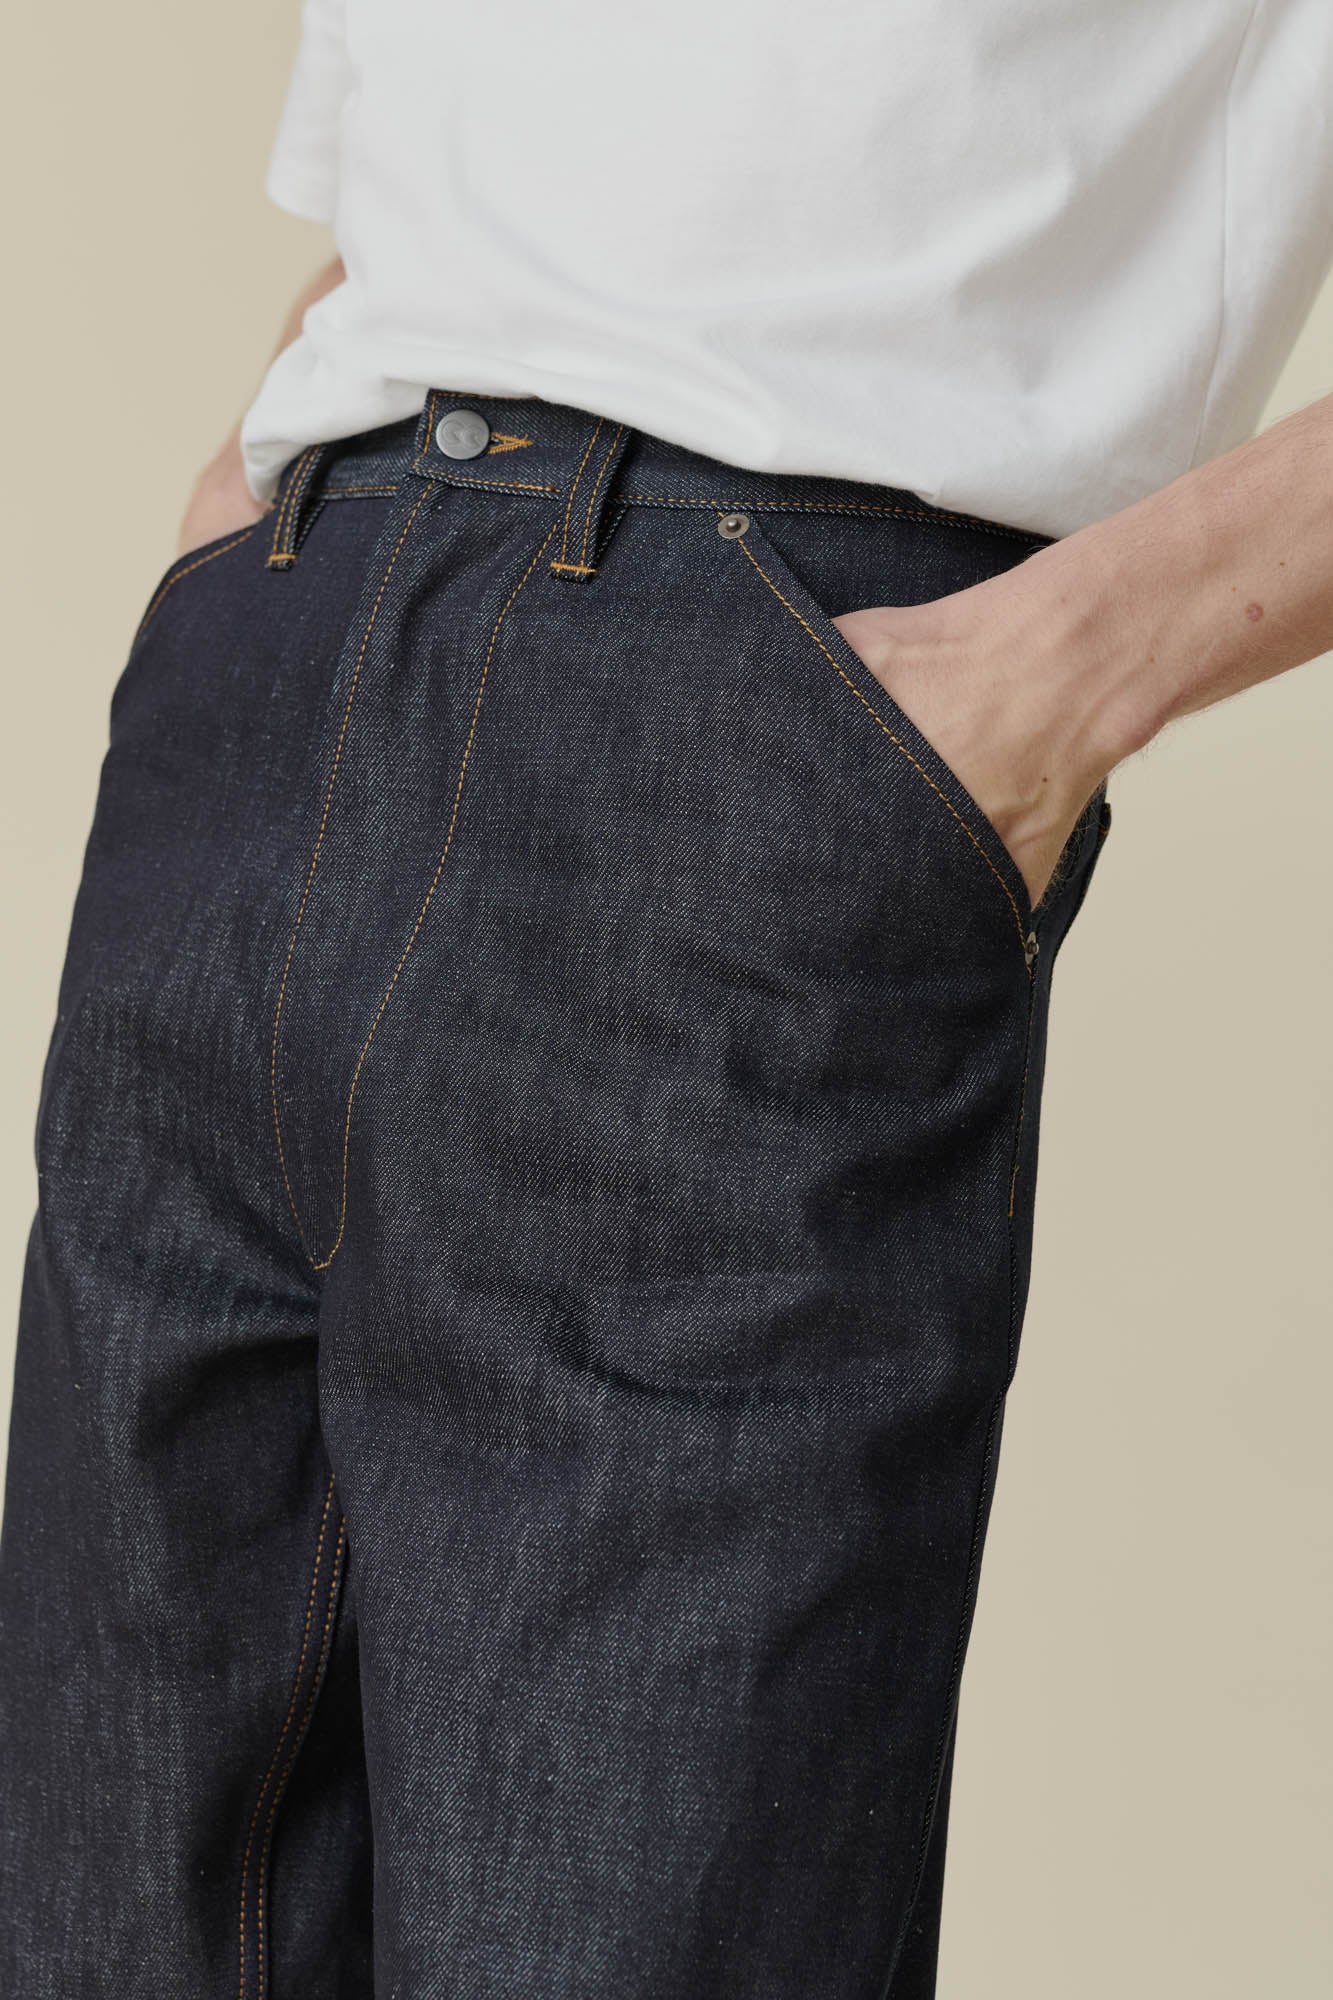 Front pocket detail shot of male in chore jean indigo